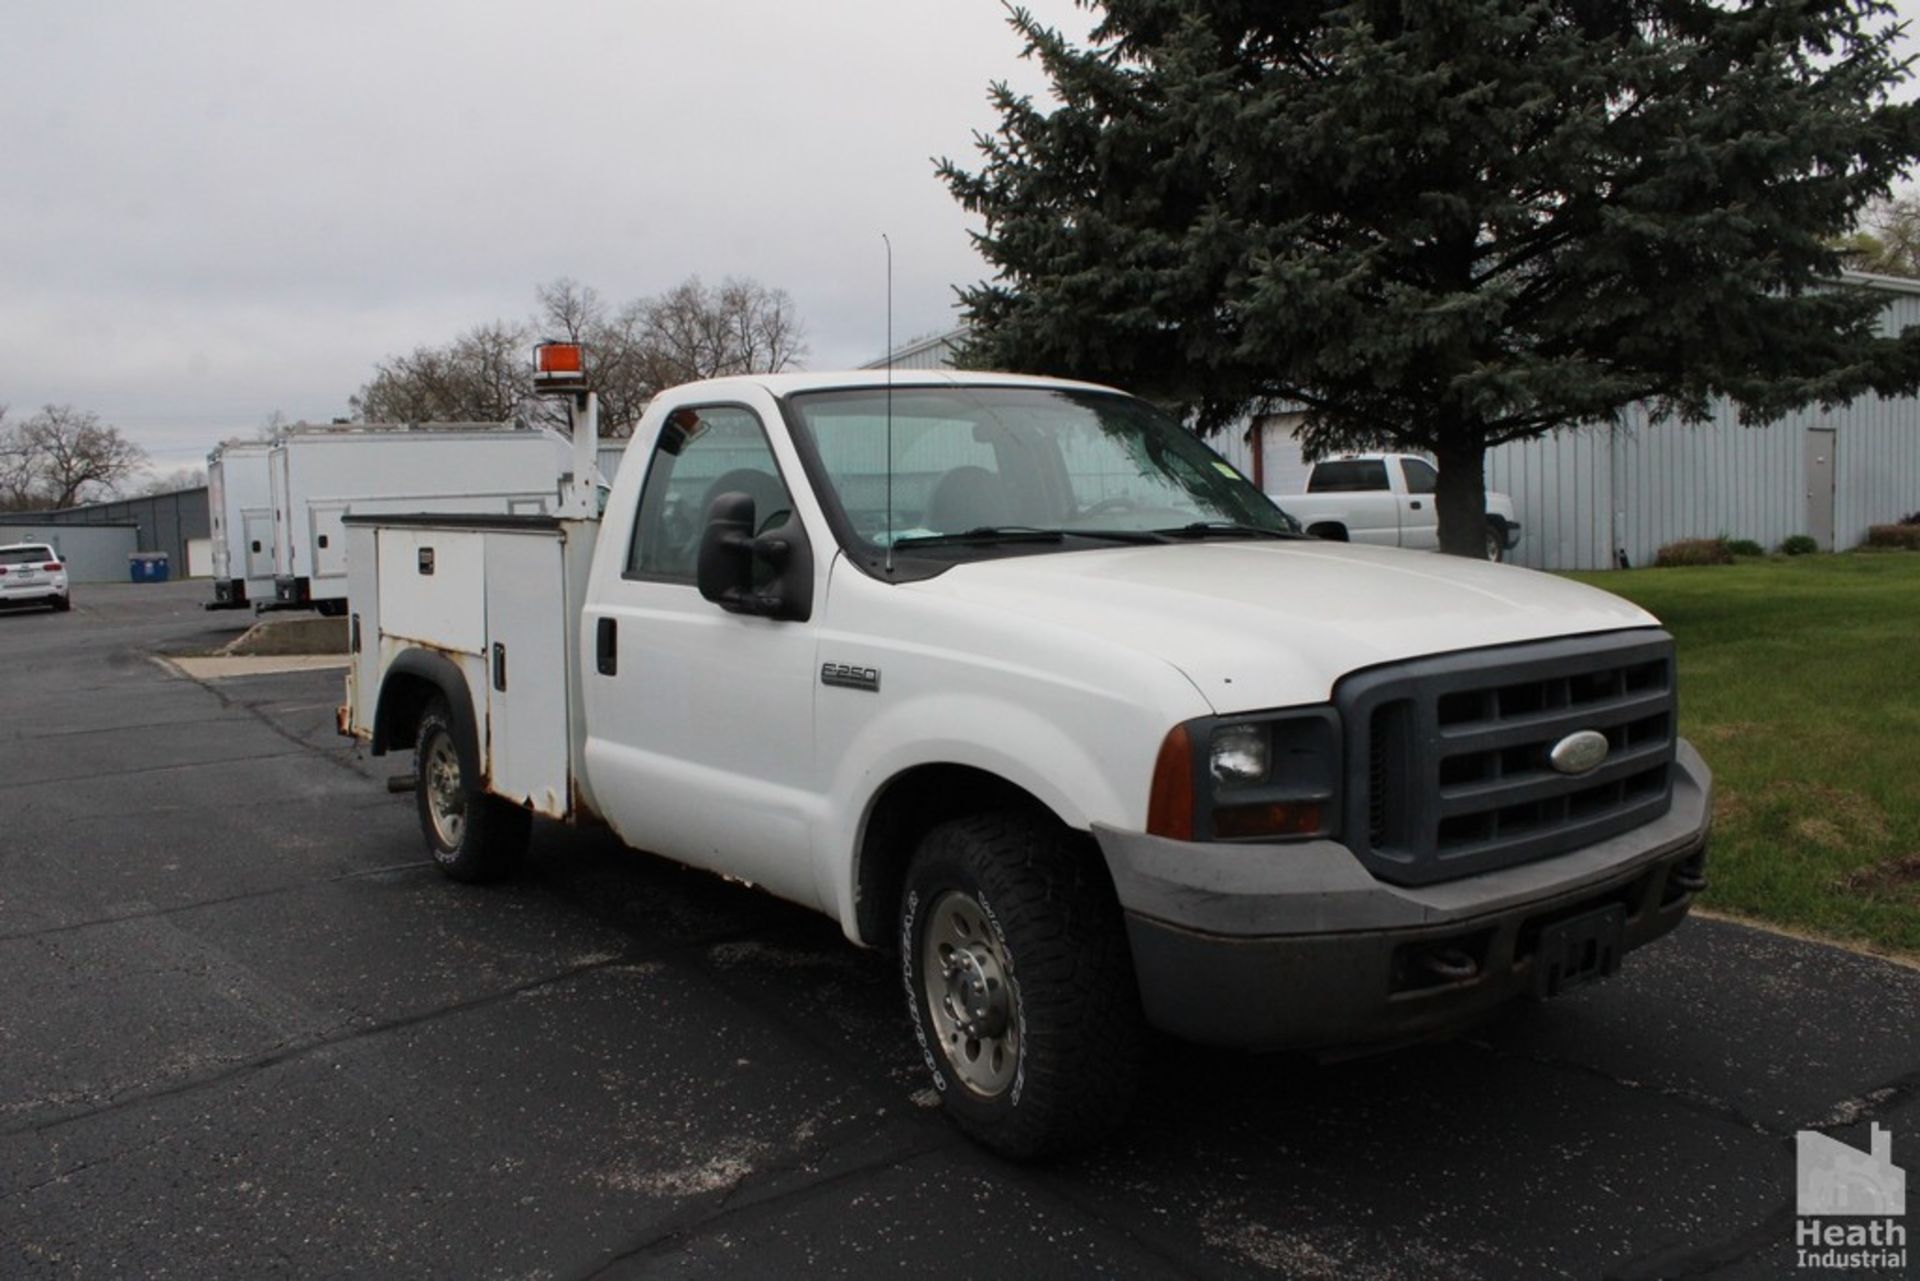 FORD F250 XL SUPER DUTY PICK UP TRUCK | CONTRACTOR STYLE BODY | DIESEL FUEL TANK WITH PUMP | - Image 2 of 9